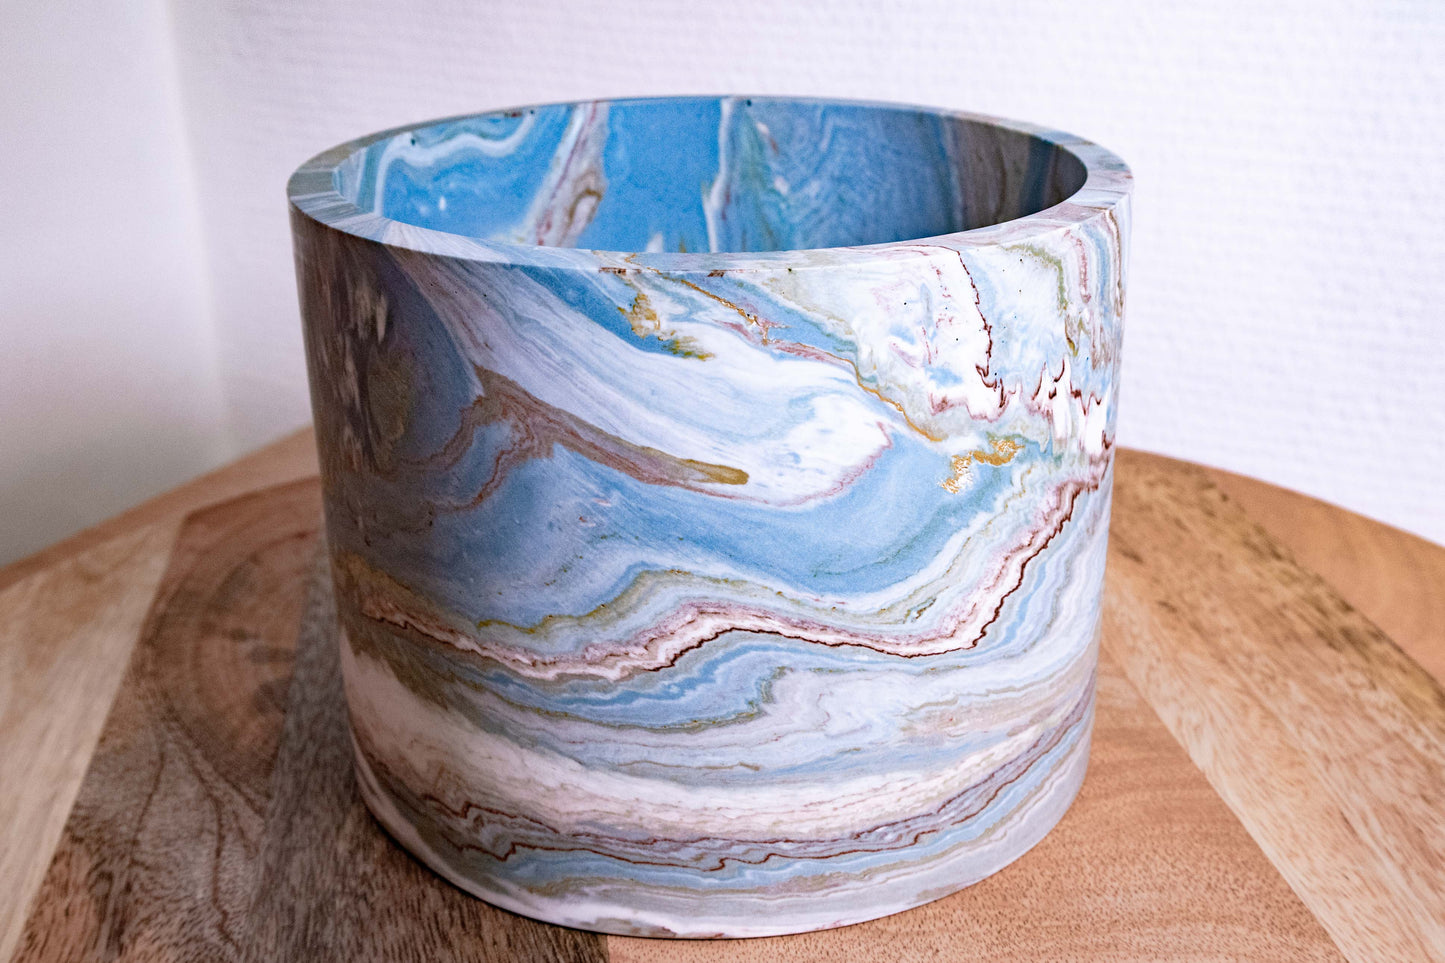 Pot Plant grd - Jesmonite - Blue, yellow, red oxyde and white marbled